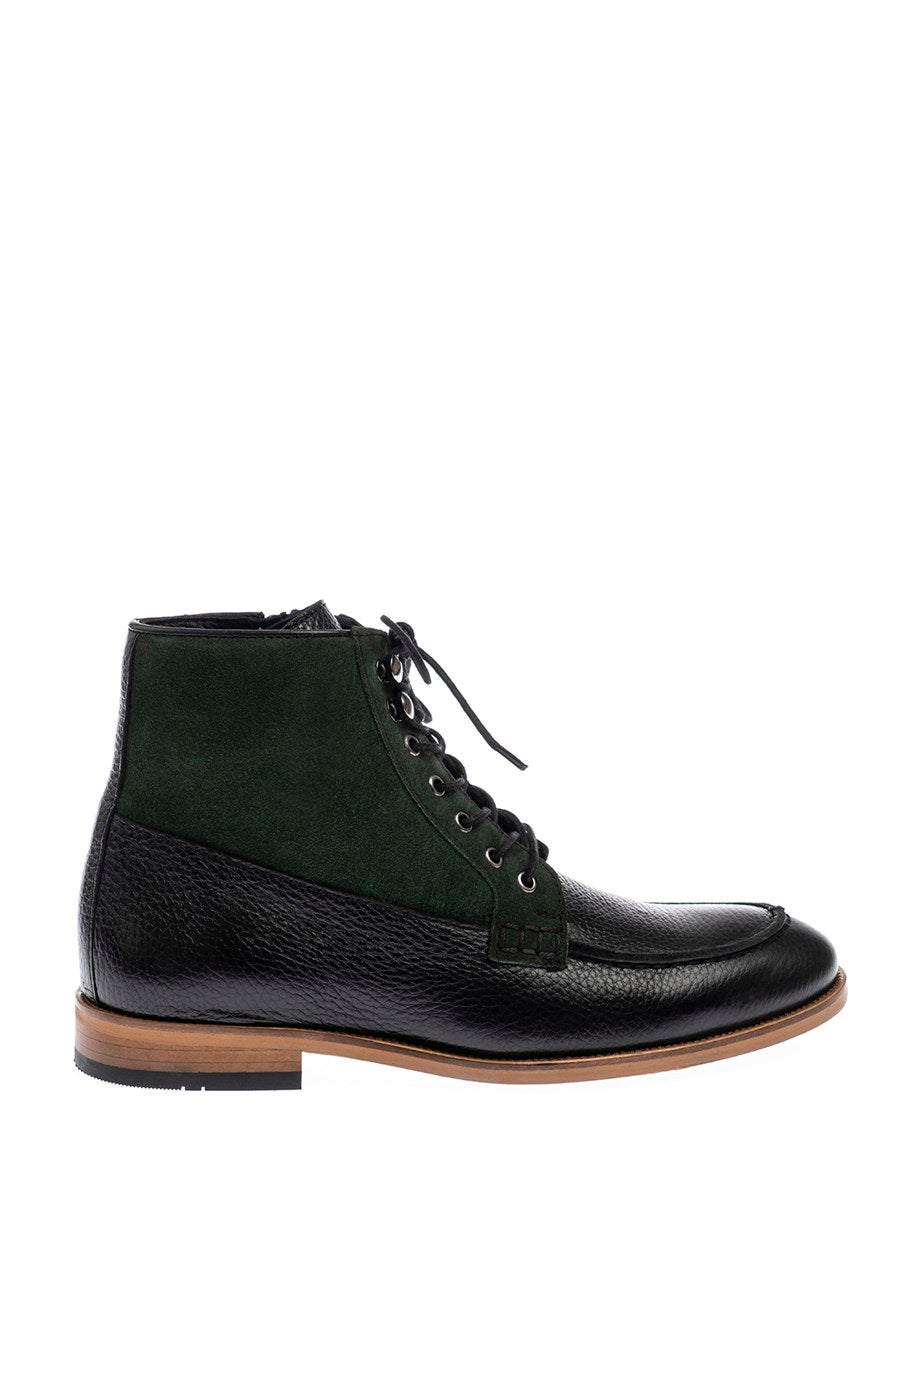 Special Design Genuine Leather Boots - MENSTYLEWITH